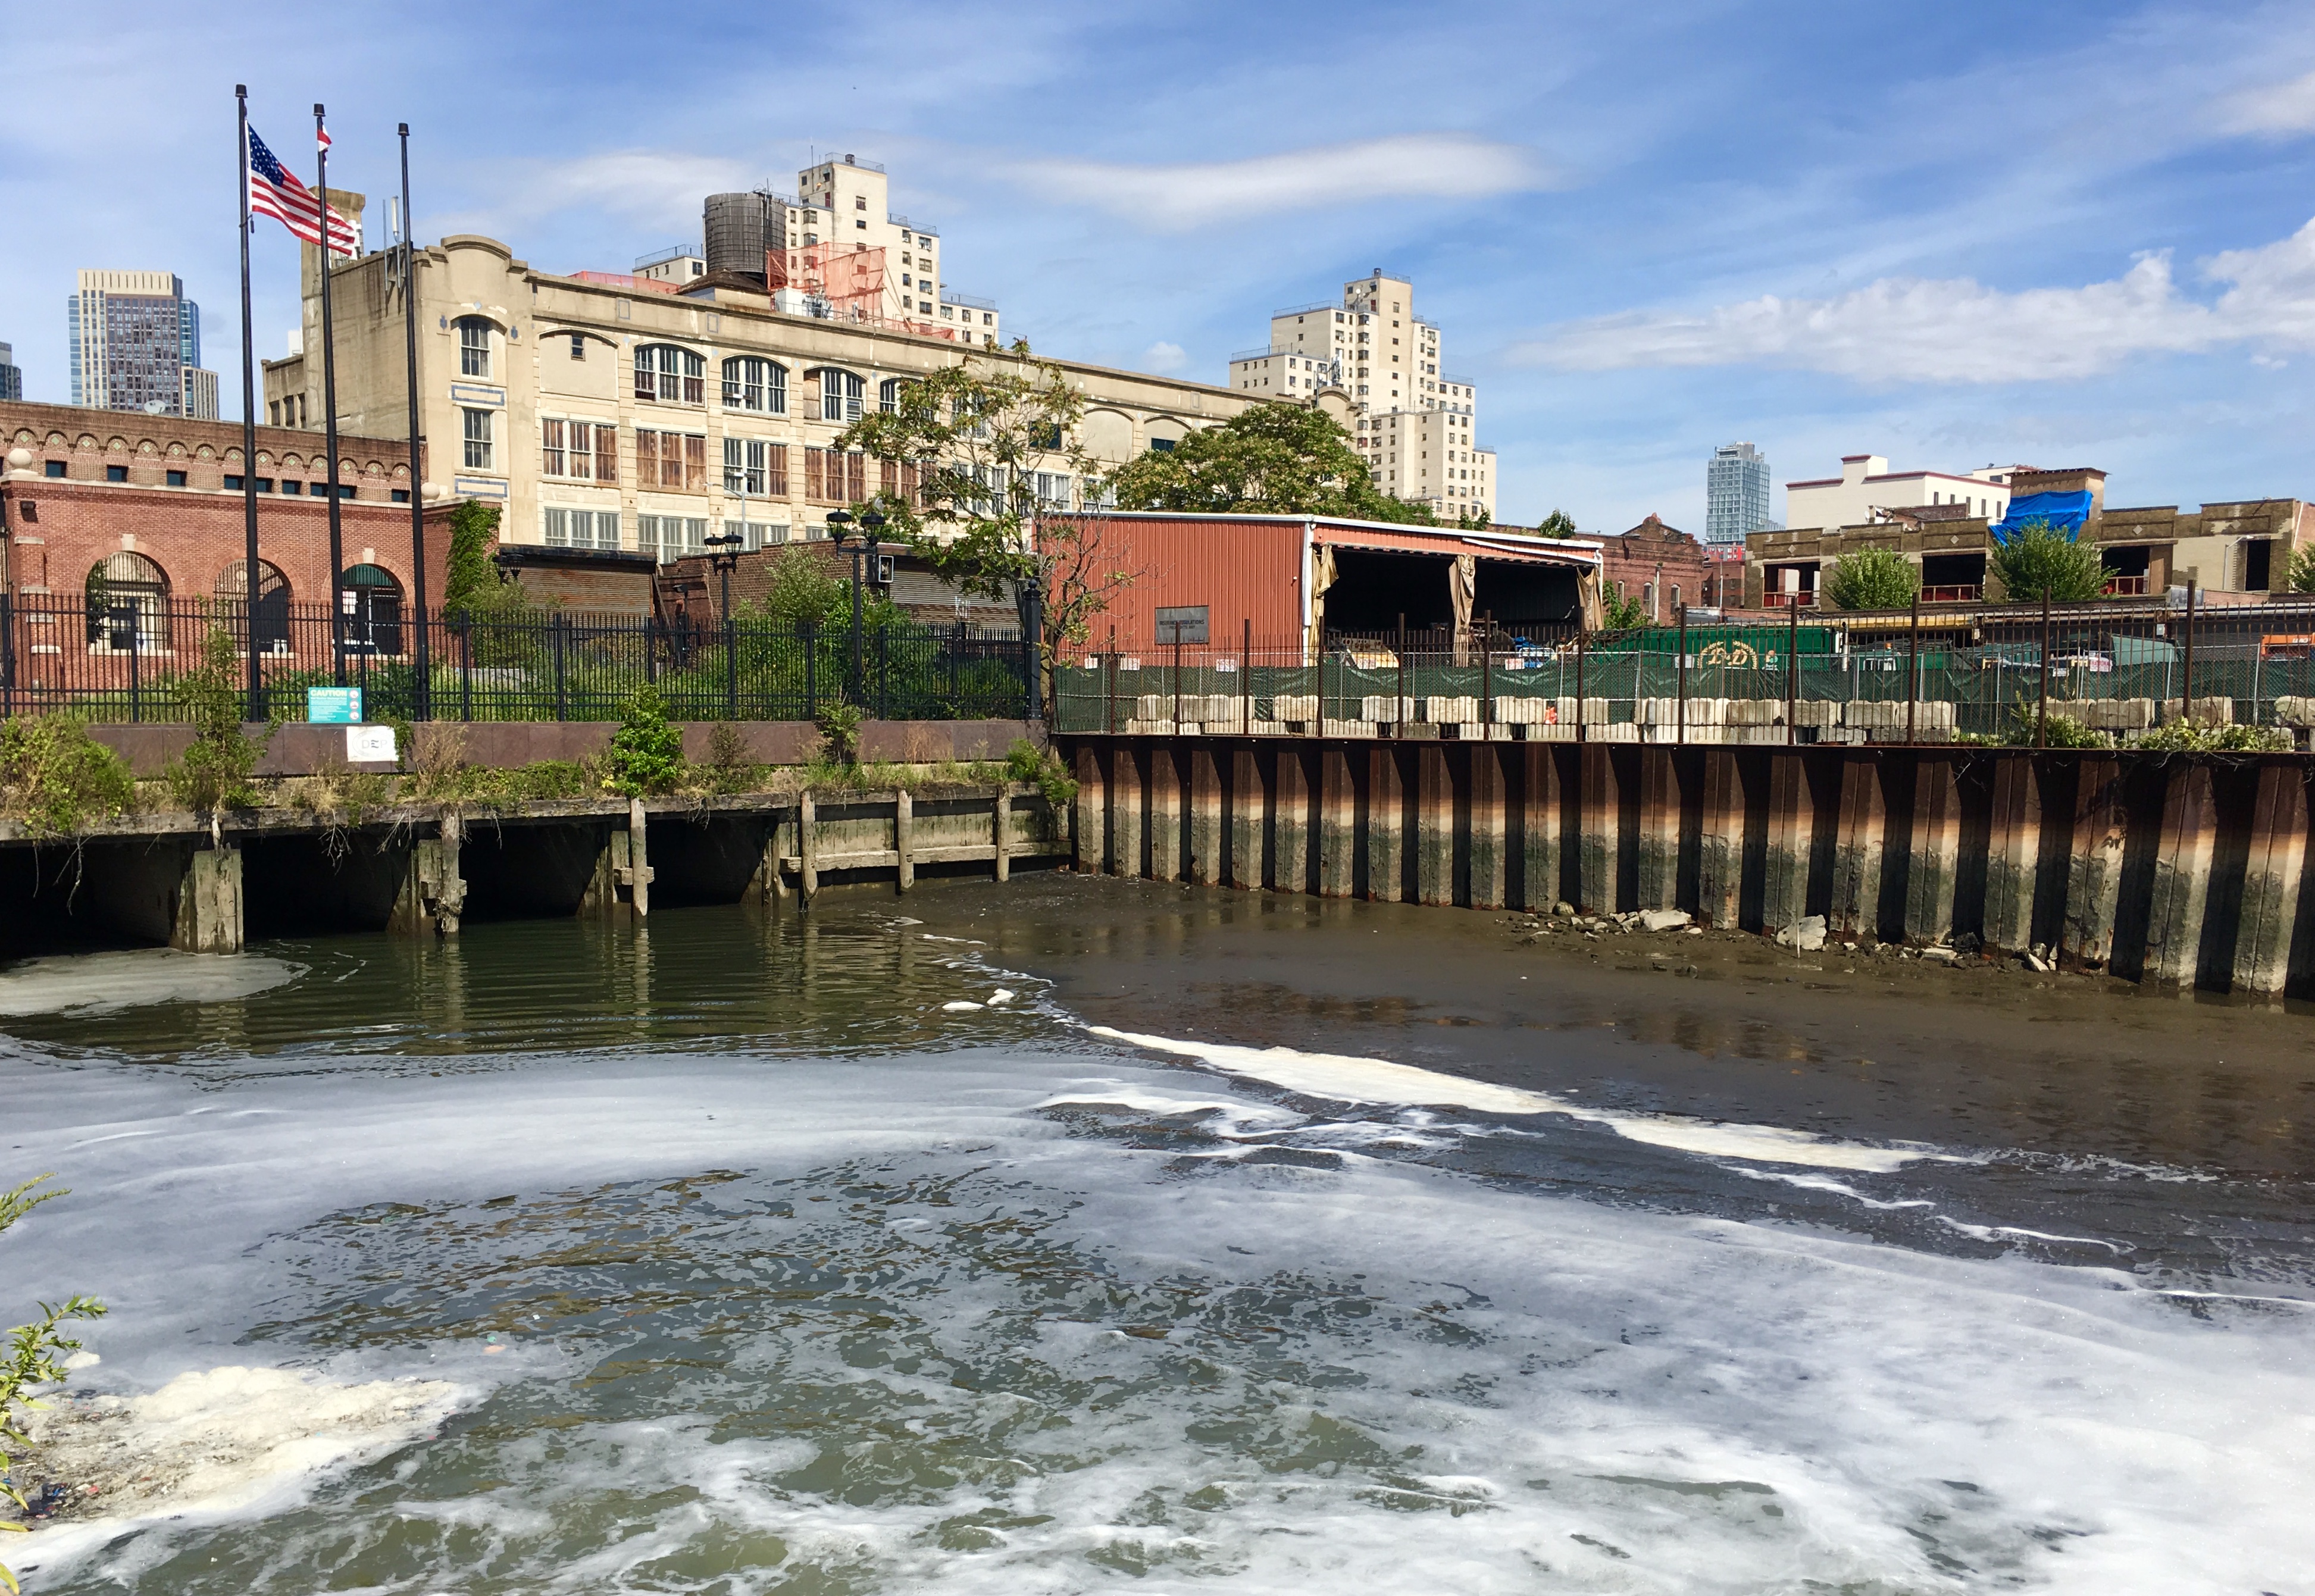 Preservationists consider the R.G. Dun & Company Building, the white building seen here from the banks of the Gowanus Canal, to be landmark-worthy. Eagle photo by Lore Croghan